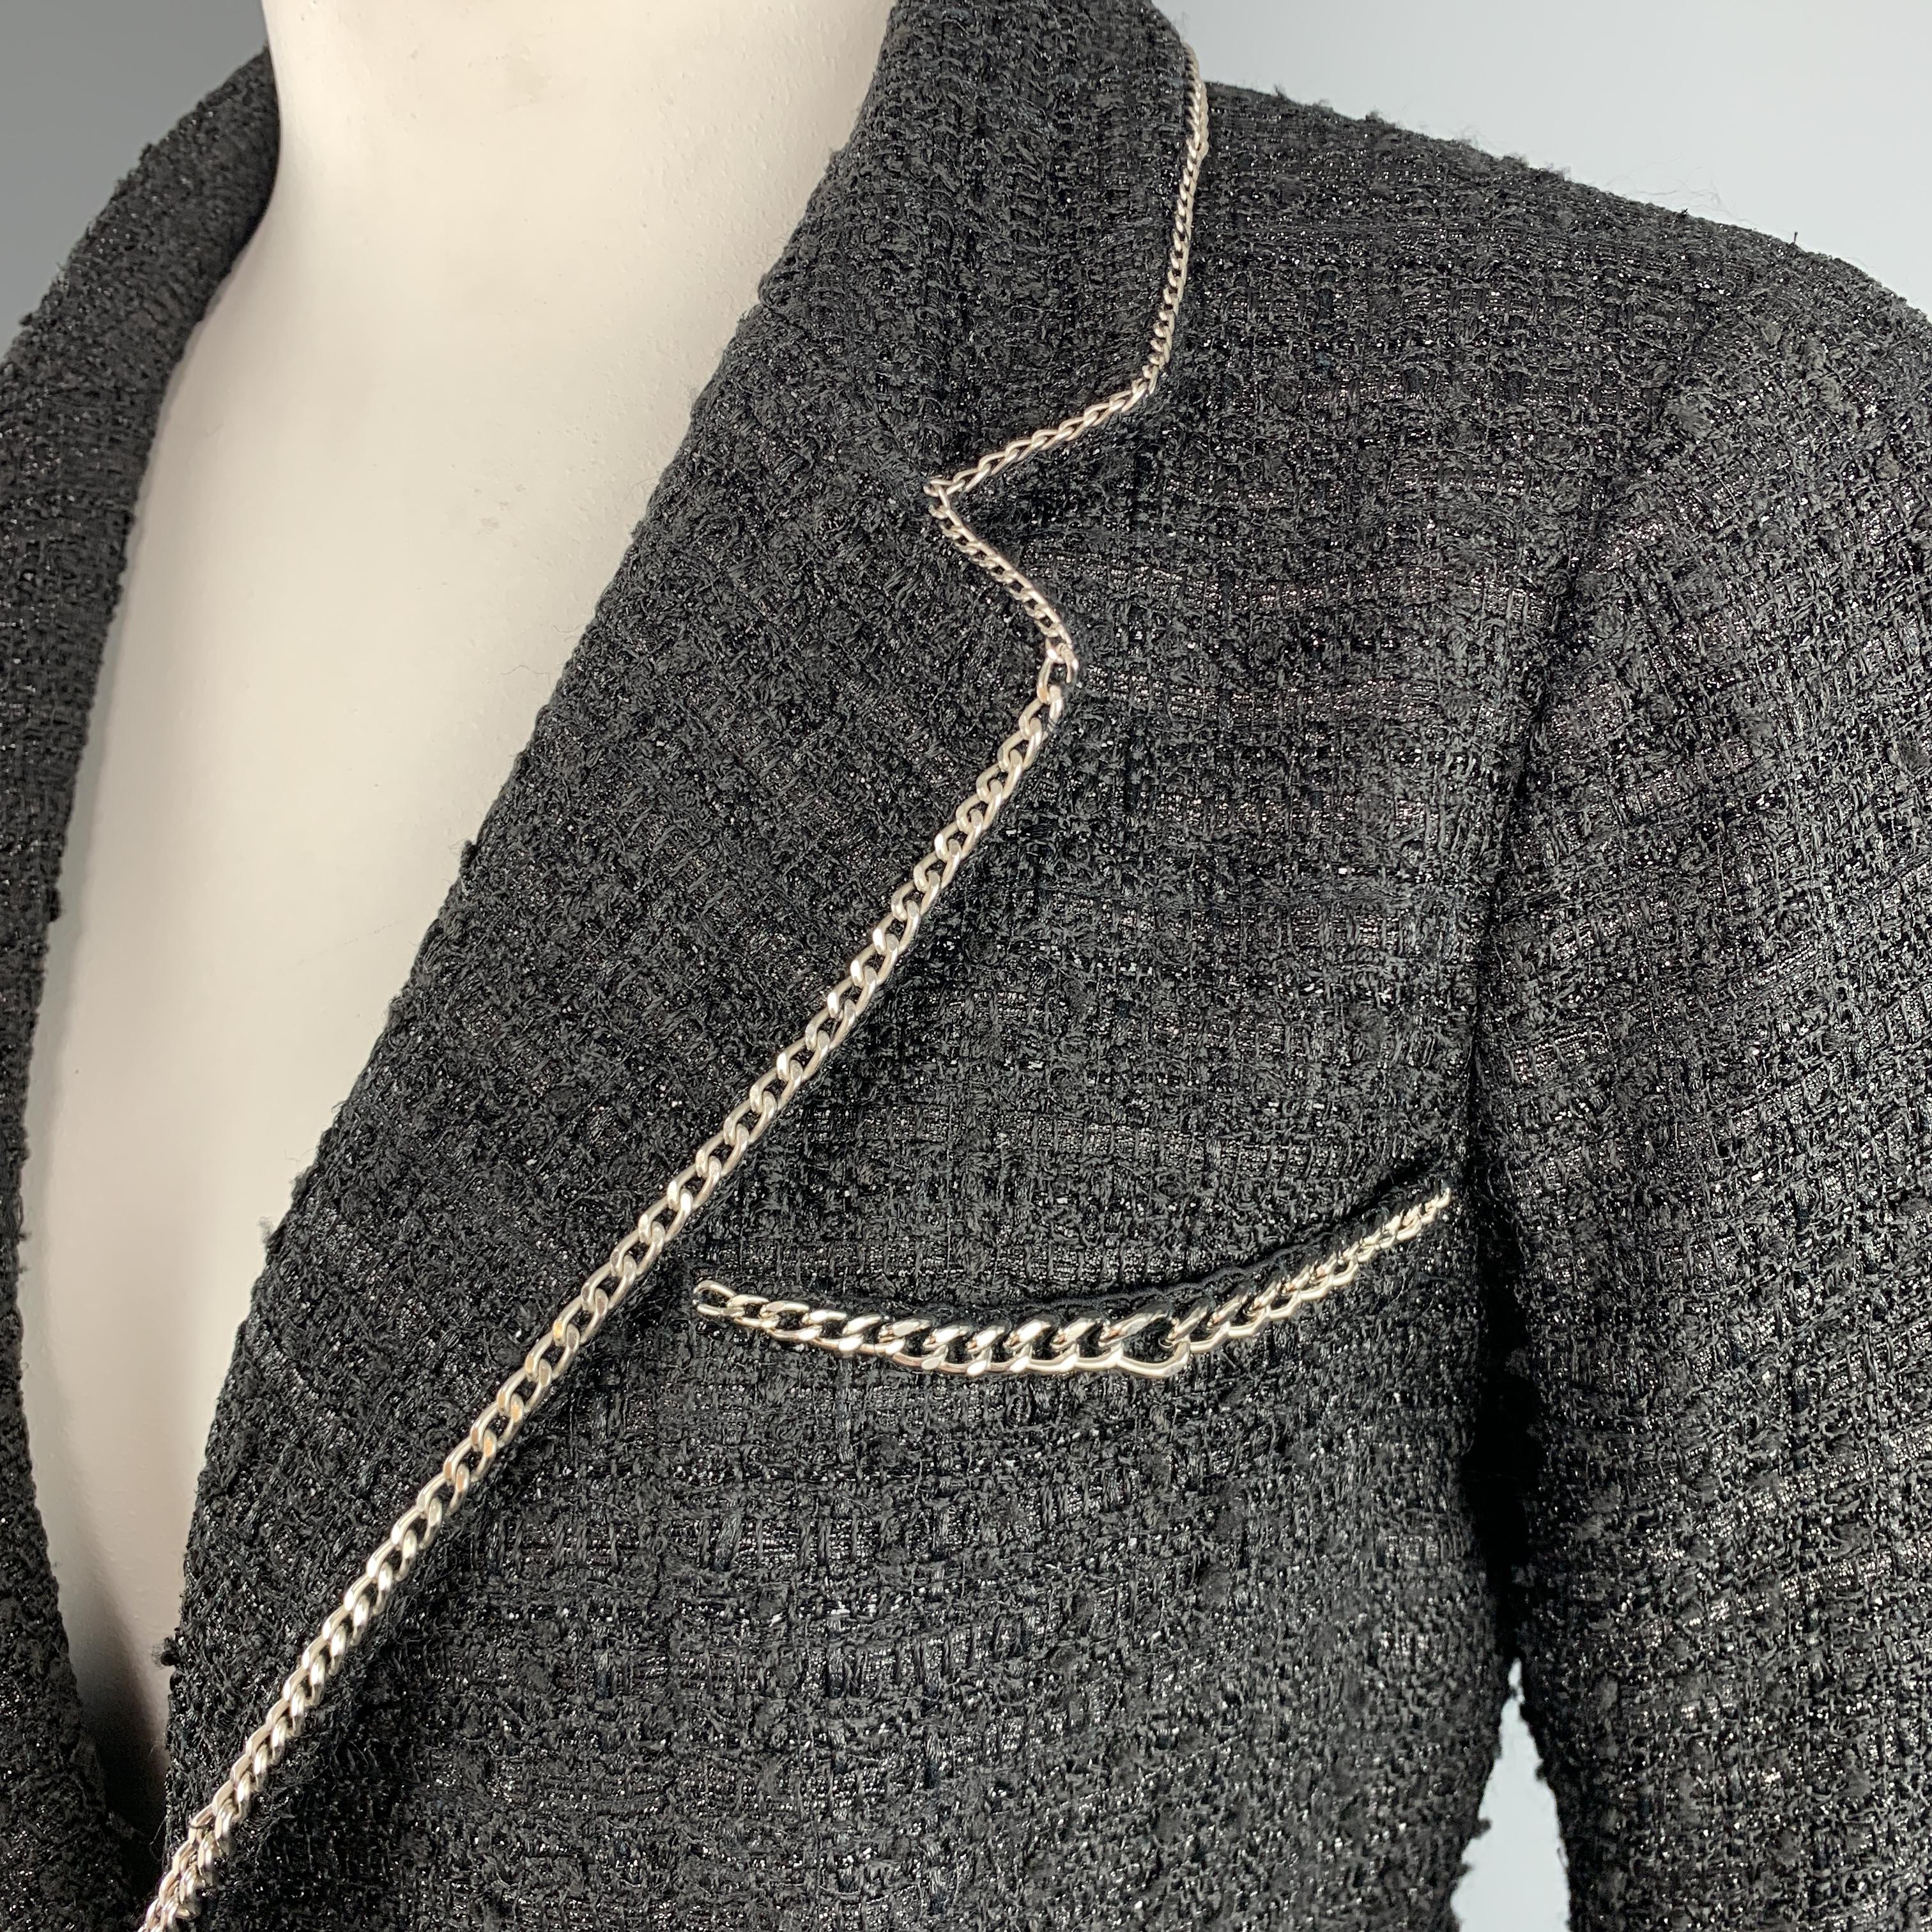 Spring 2006 Chanel metallic black tweed blazer with silver-tone chain-link trim piping throughout, notch lapel, three pockets, double vented back, hidden button sleeves with CC accent, silk lining, and single hook and eye closure at front. Made in